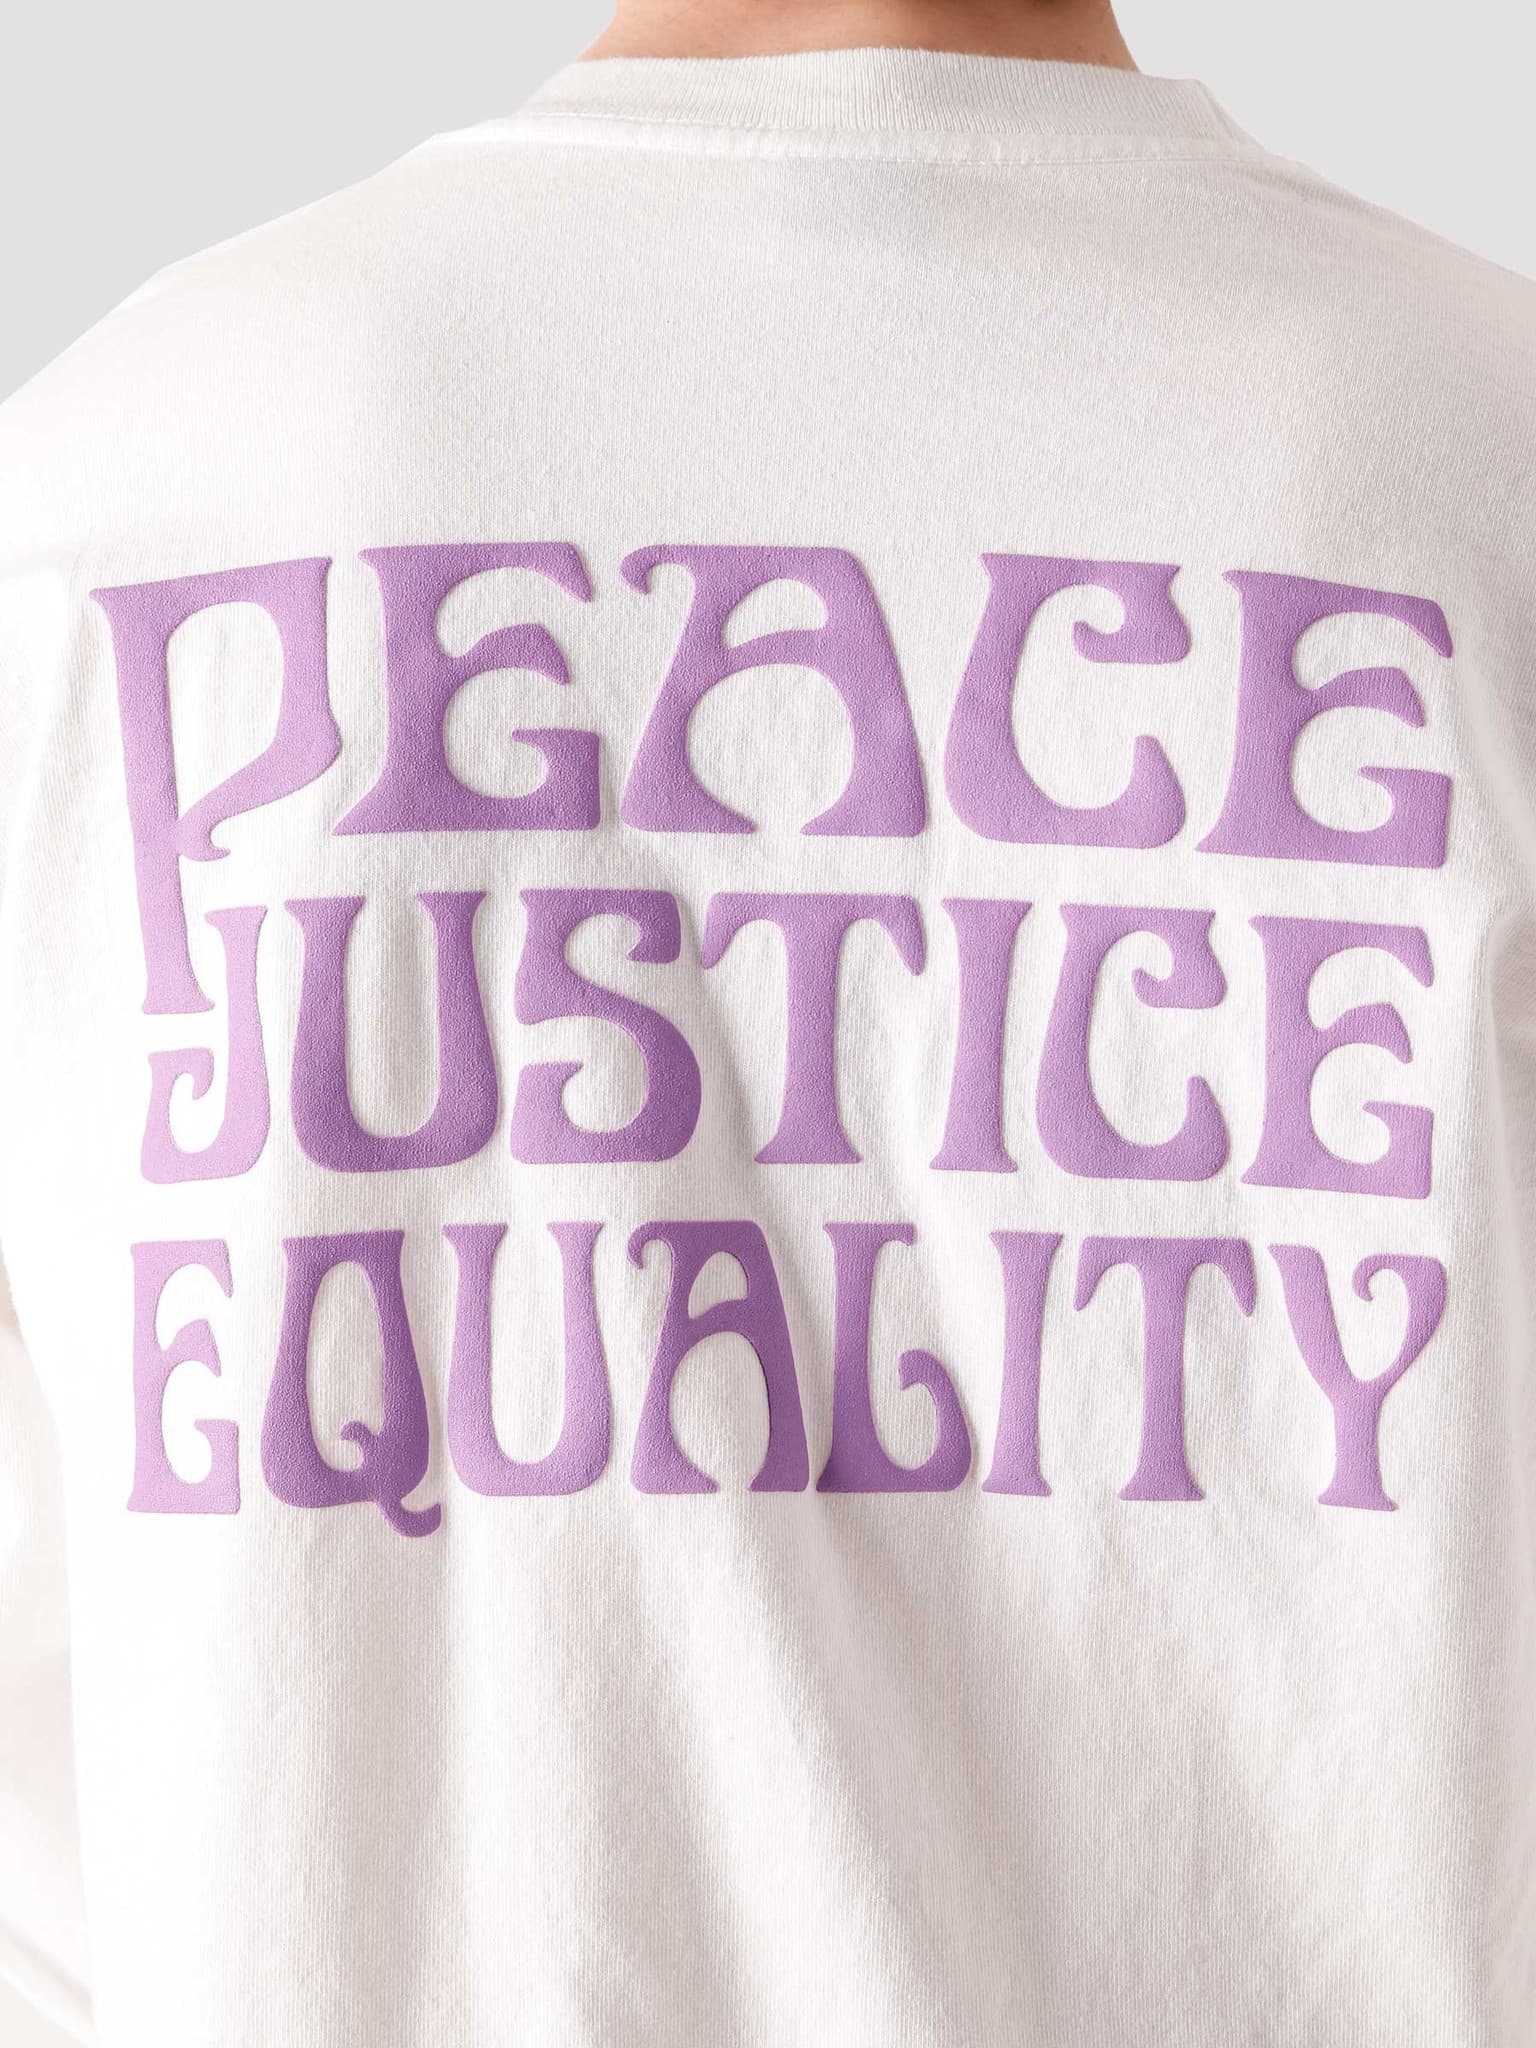 Peace Justice Equality Longsleeve White 167102627-WHT